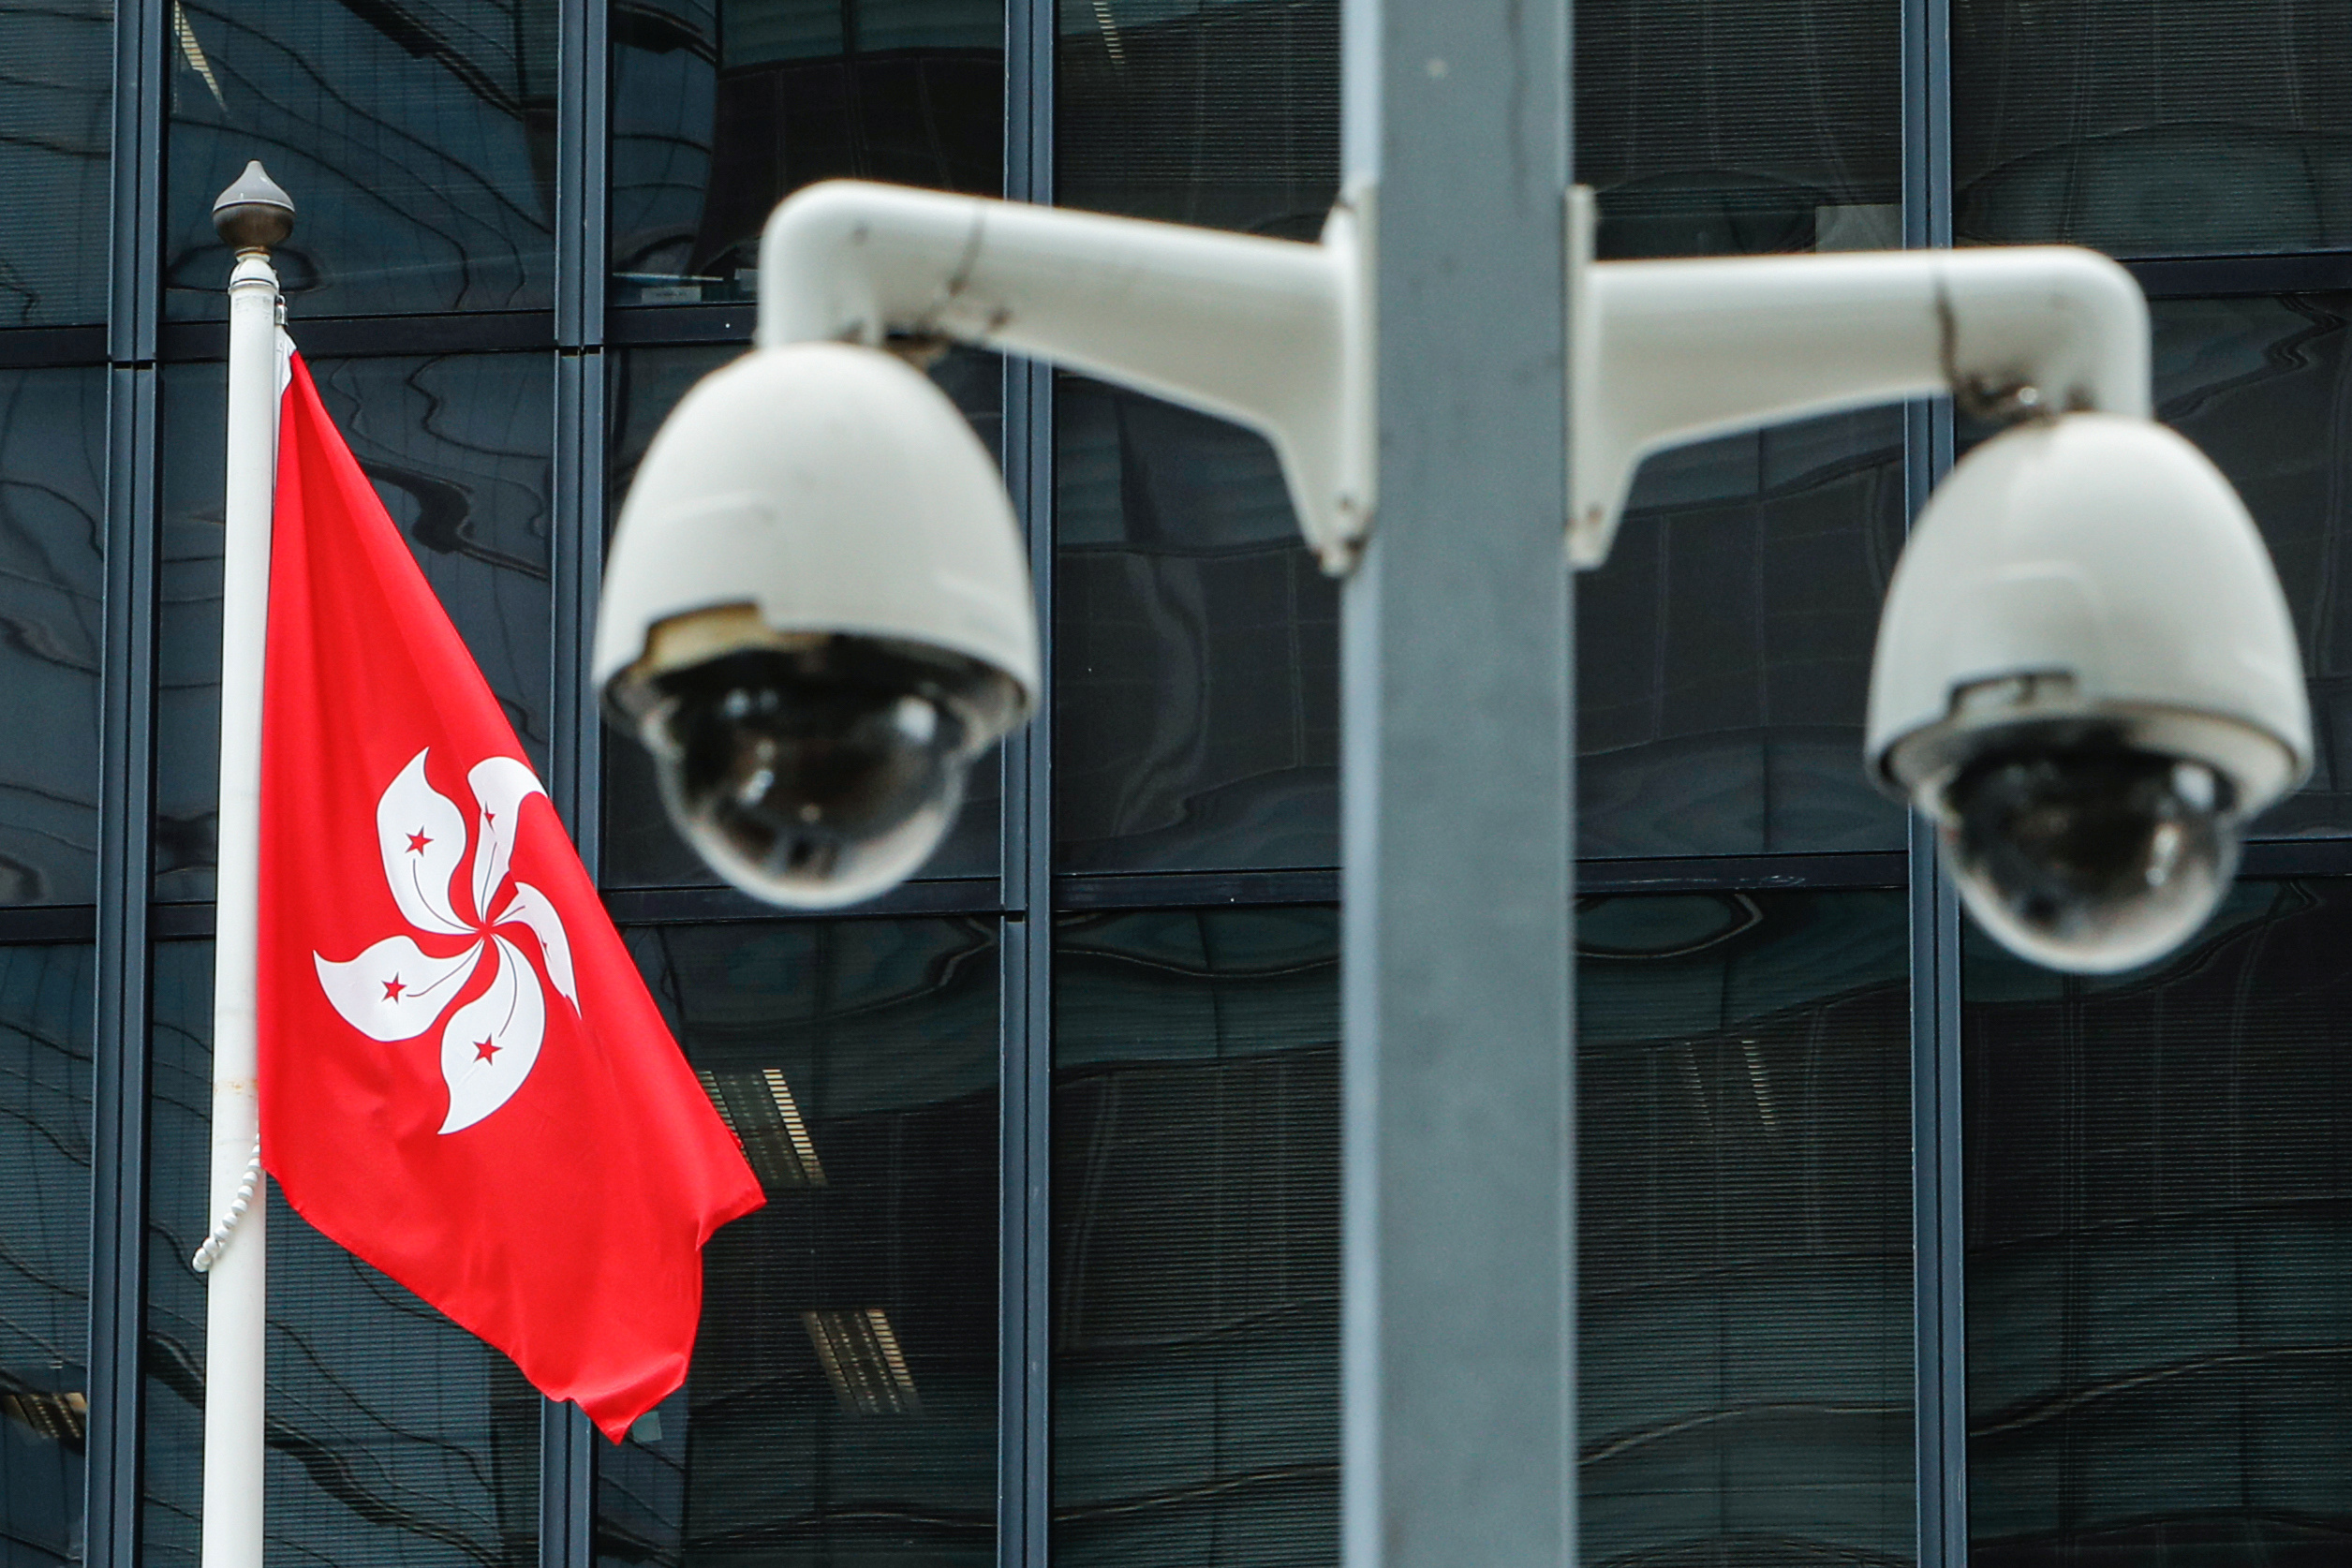 A Hong Kong flag is flown behind a pair of surveillance cameras outside the Central Government Offices in Hong Kong